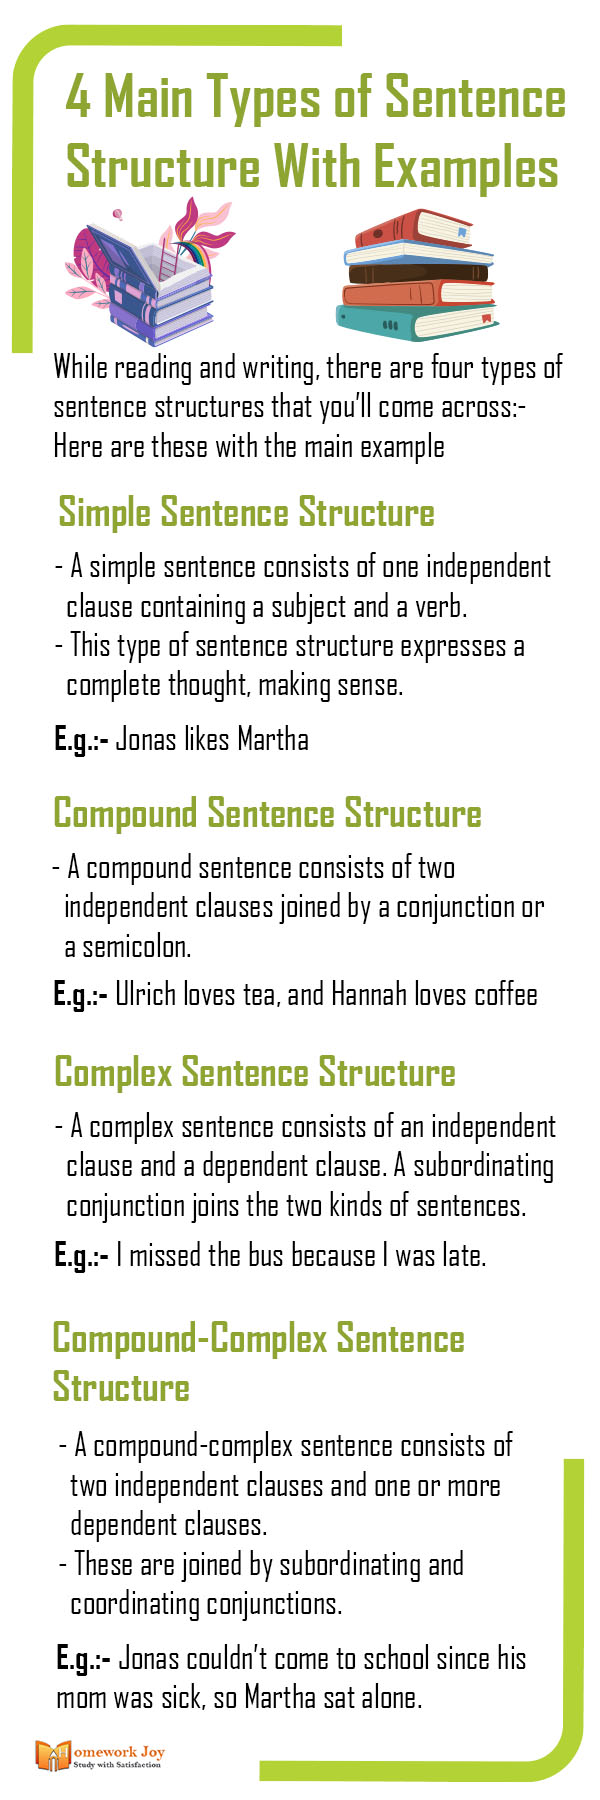 4-main-types-of-sentence-structure-with-examples